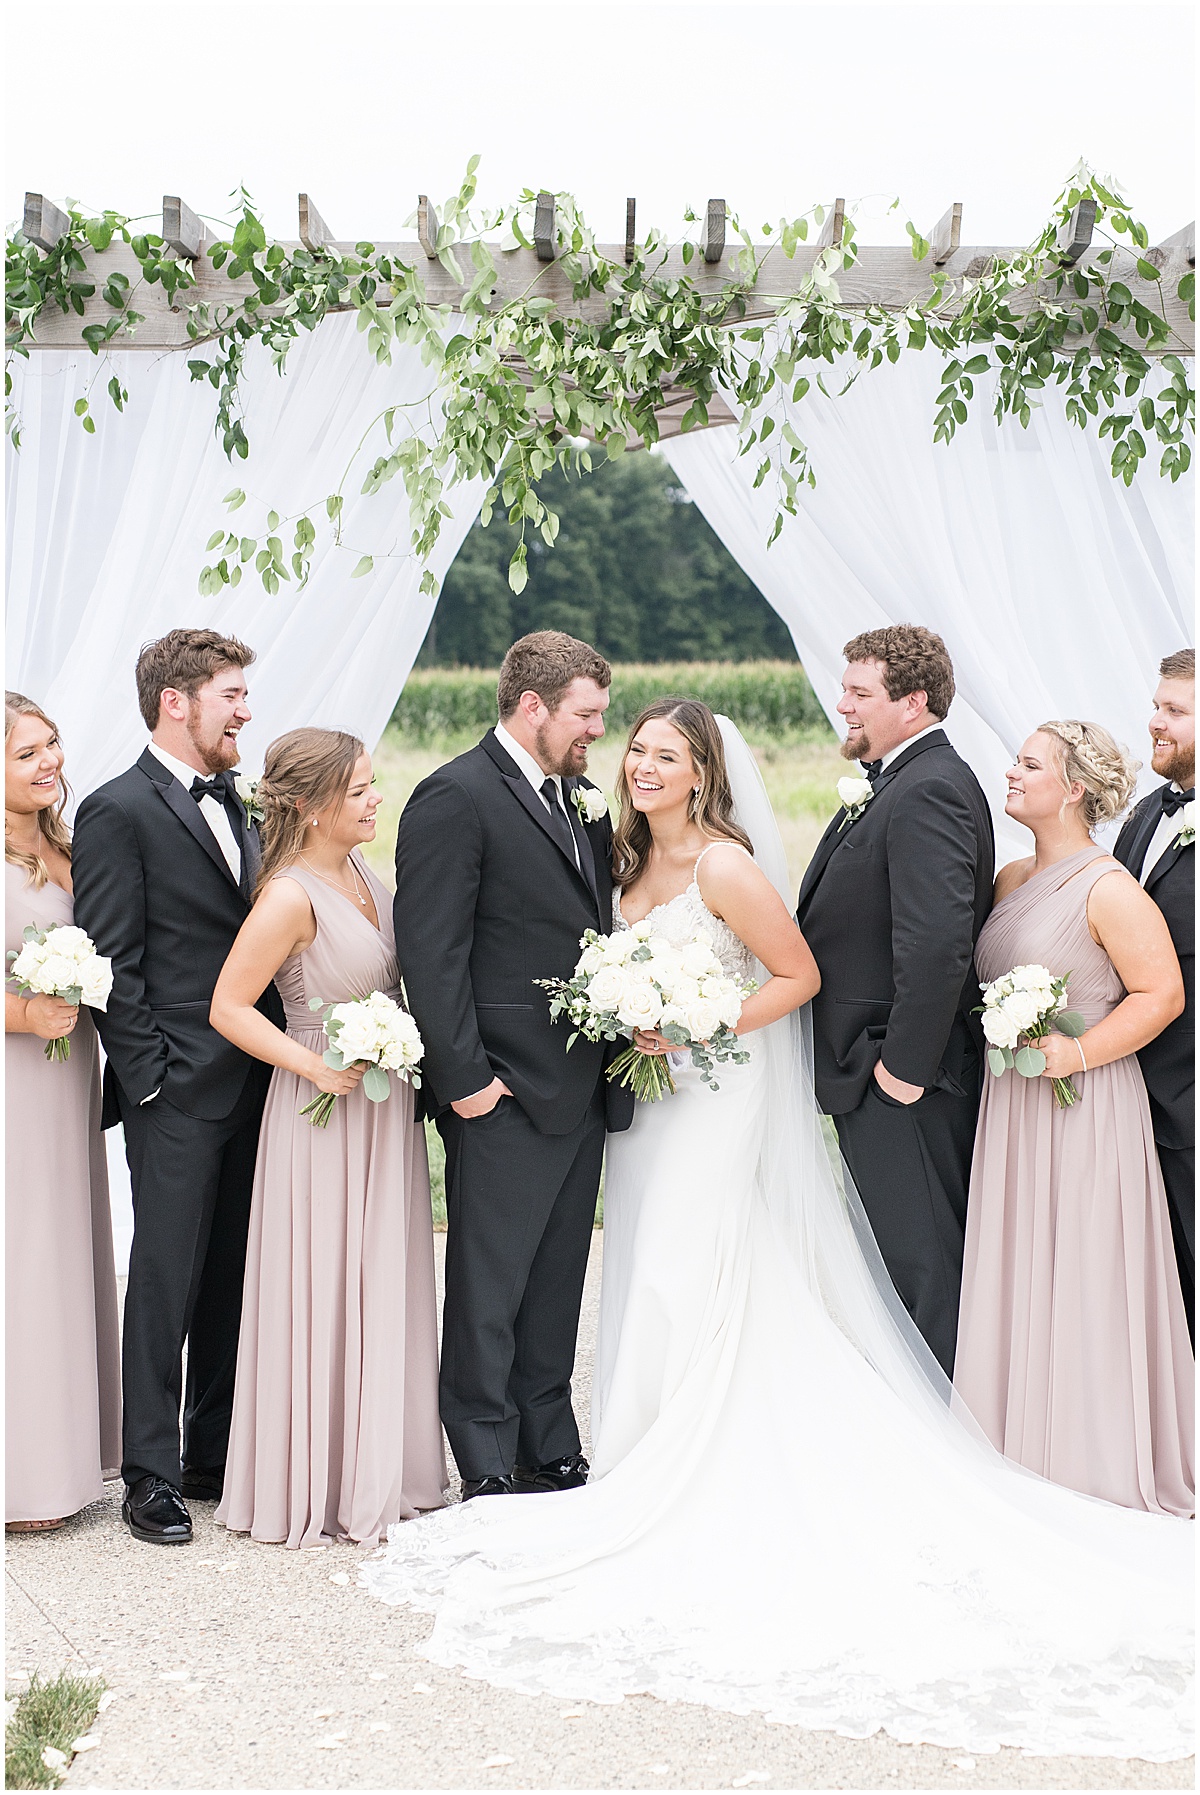 Mr. & Mrs. Helton: A River Glen Country Club Wedding in Fishers, Indiana